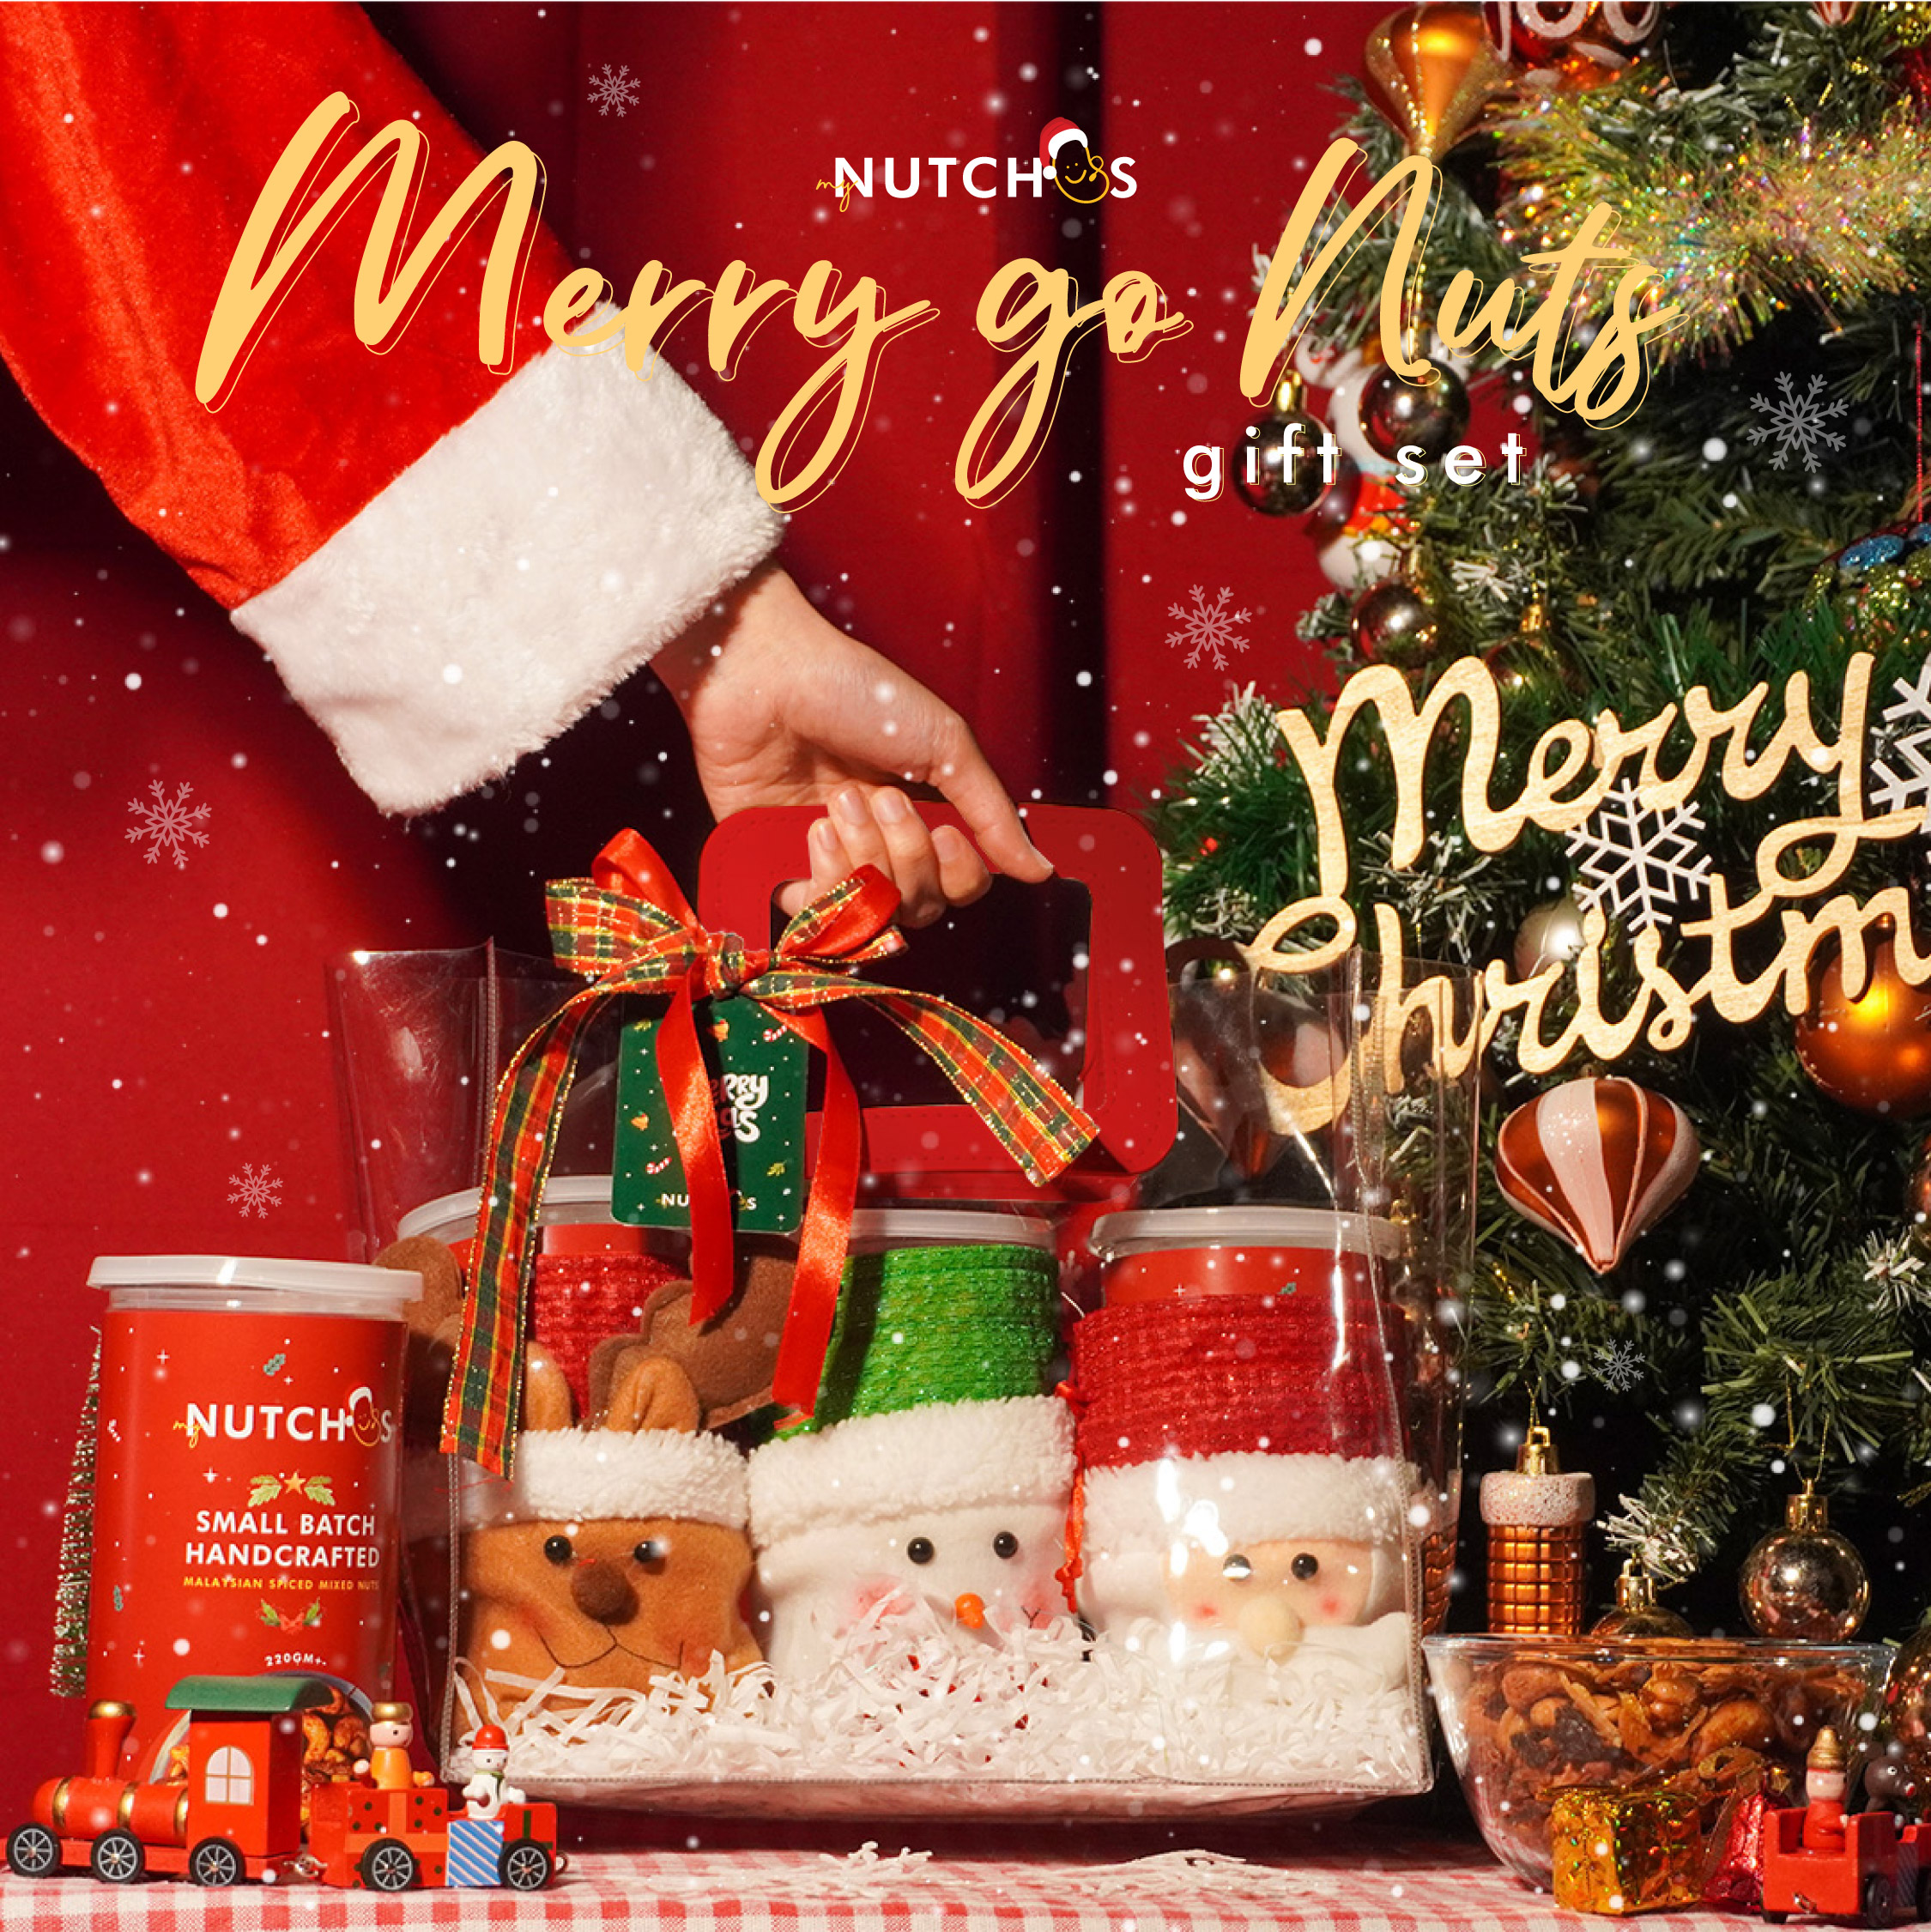 Merry go Nuts gift set